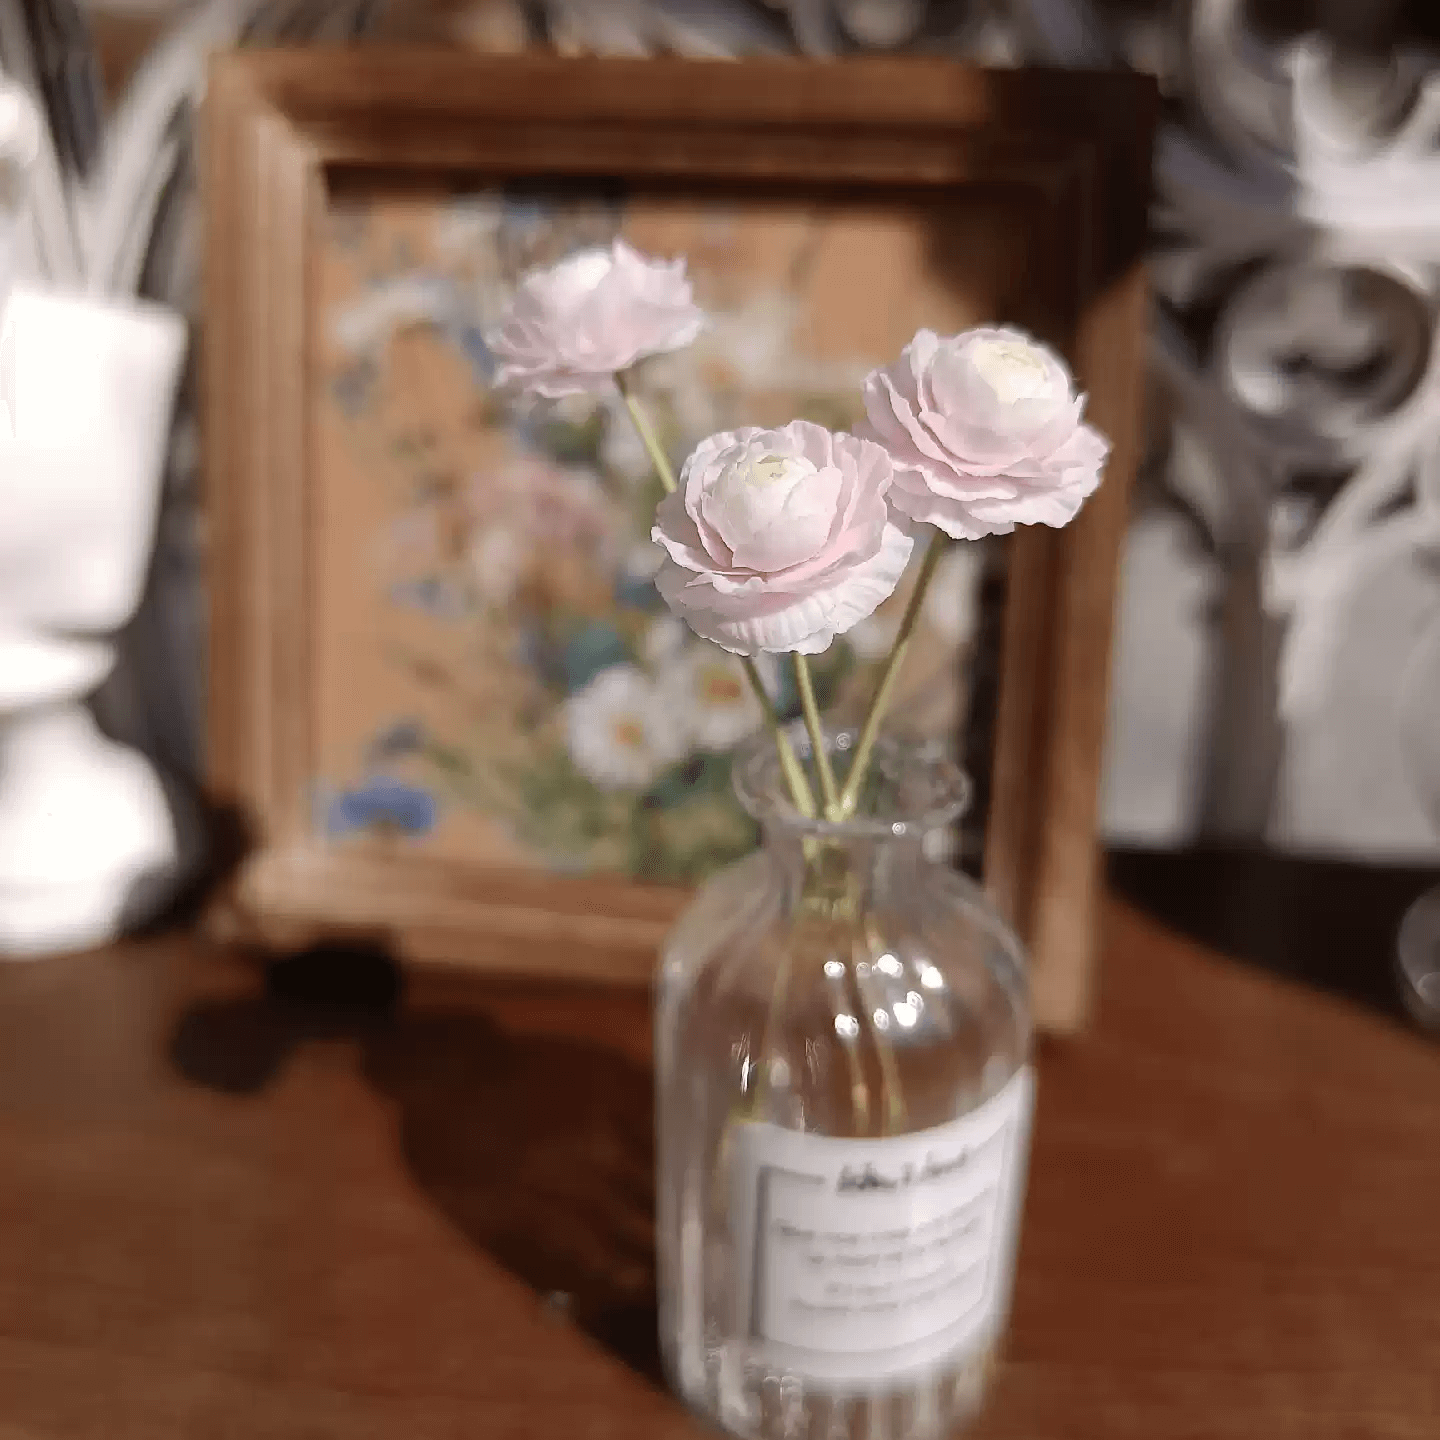 Ranunculus asiaticus, commonly called Persian buttercup, is a tuberous-rooted plant that blooms in late spring to early summer. Miniature for dolls, dollhouses, roomboxes. Suitable for Blythe, Barbie, Paola,and other dolls with a height of 25-40cm (10-15.8 inches). Scale: 1:6; 1:12 Material: Handmade from Clay